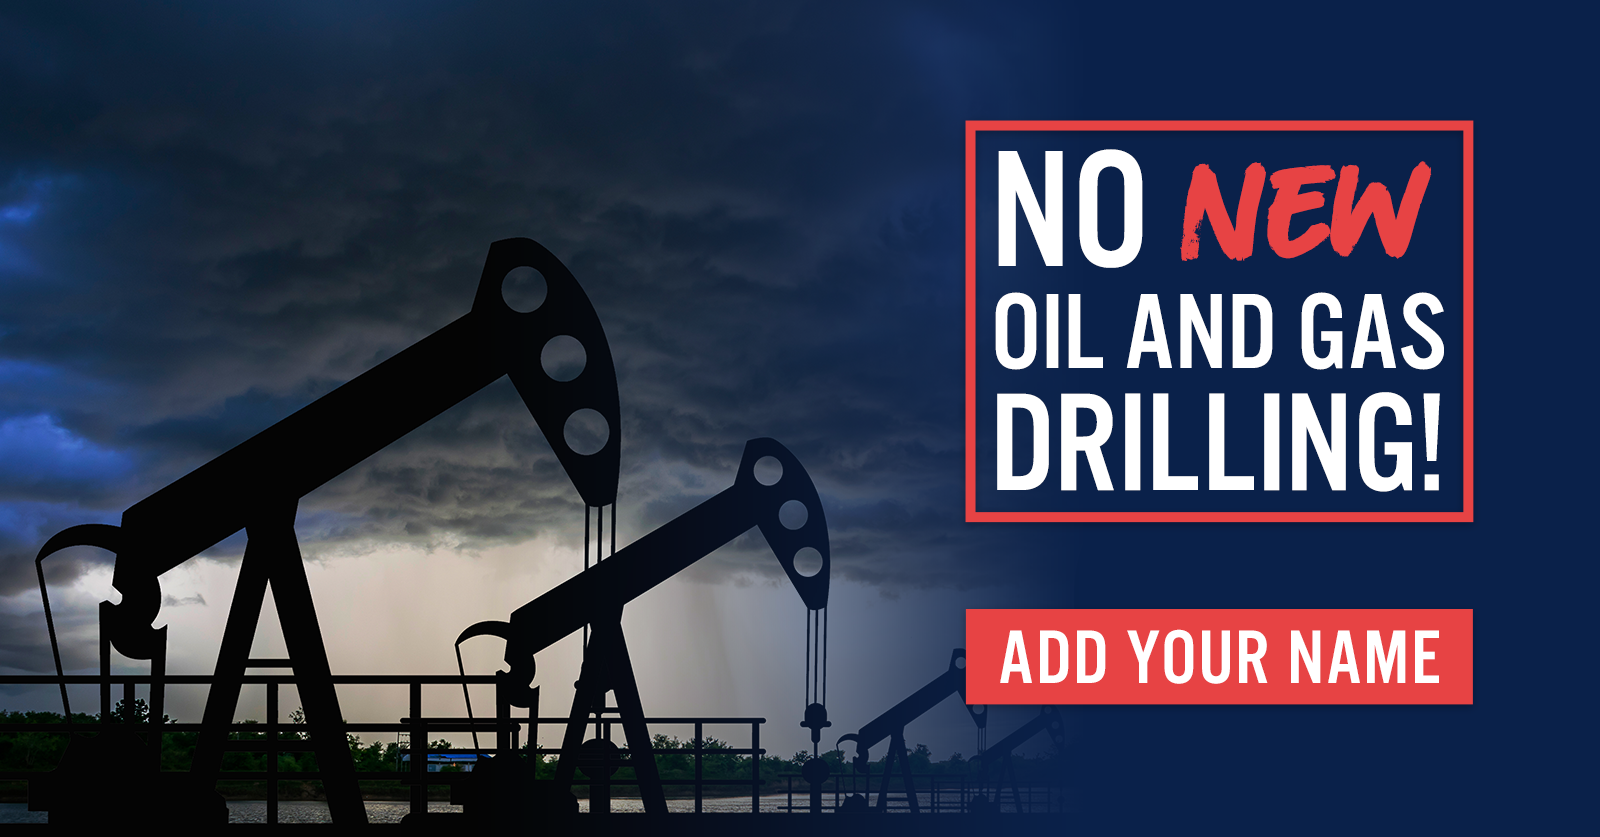 New NEW Oil and Gas Drilling! Add your Name!